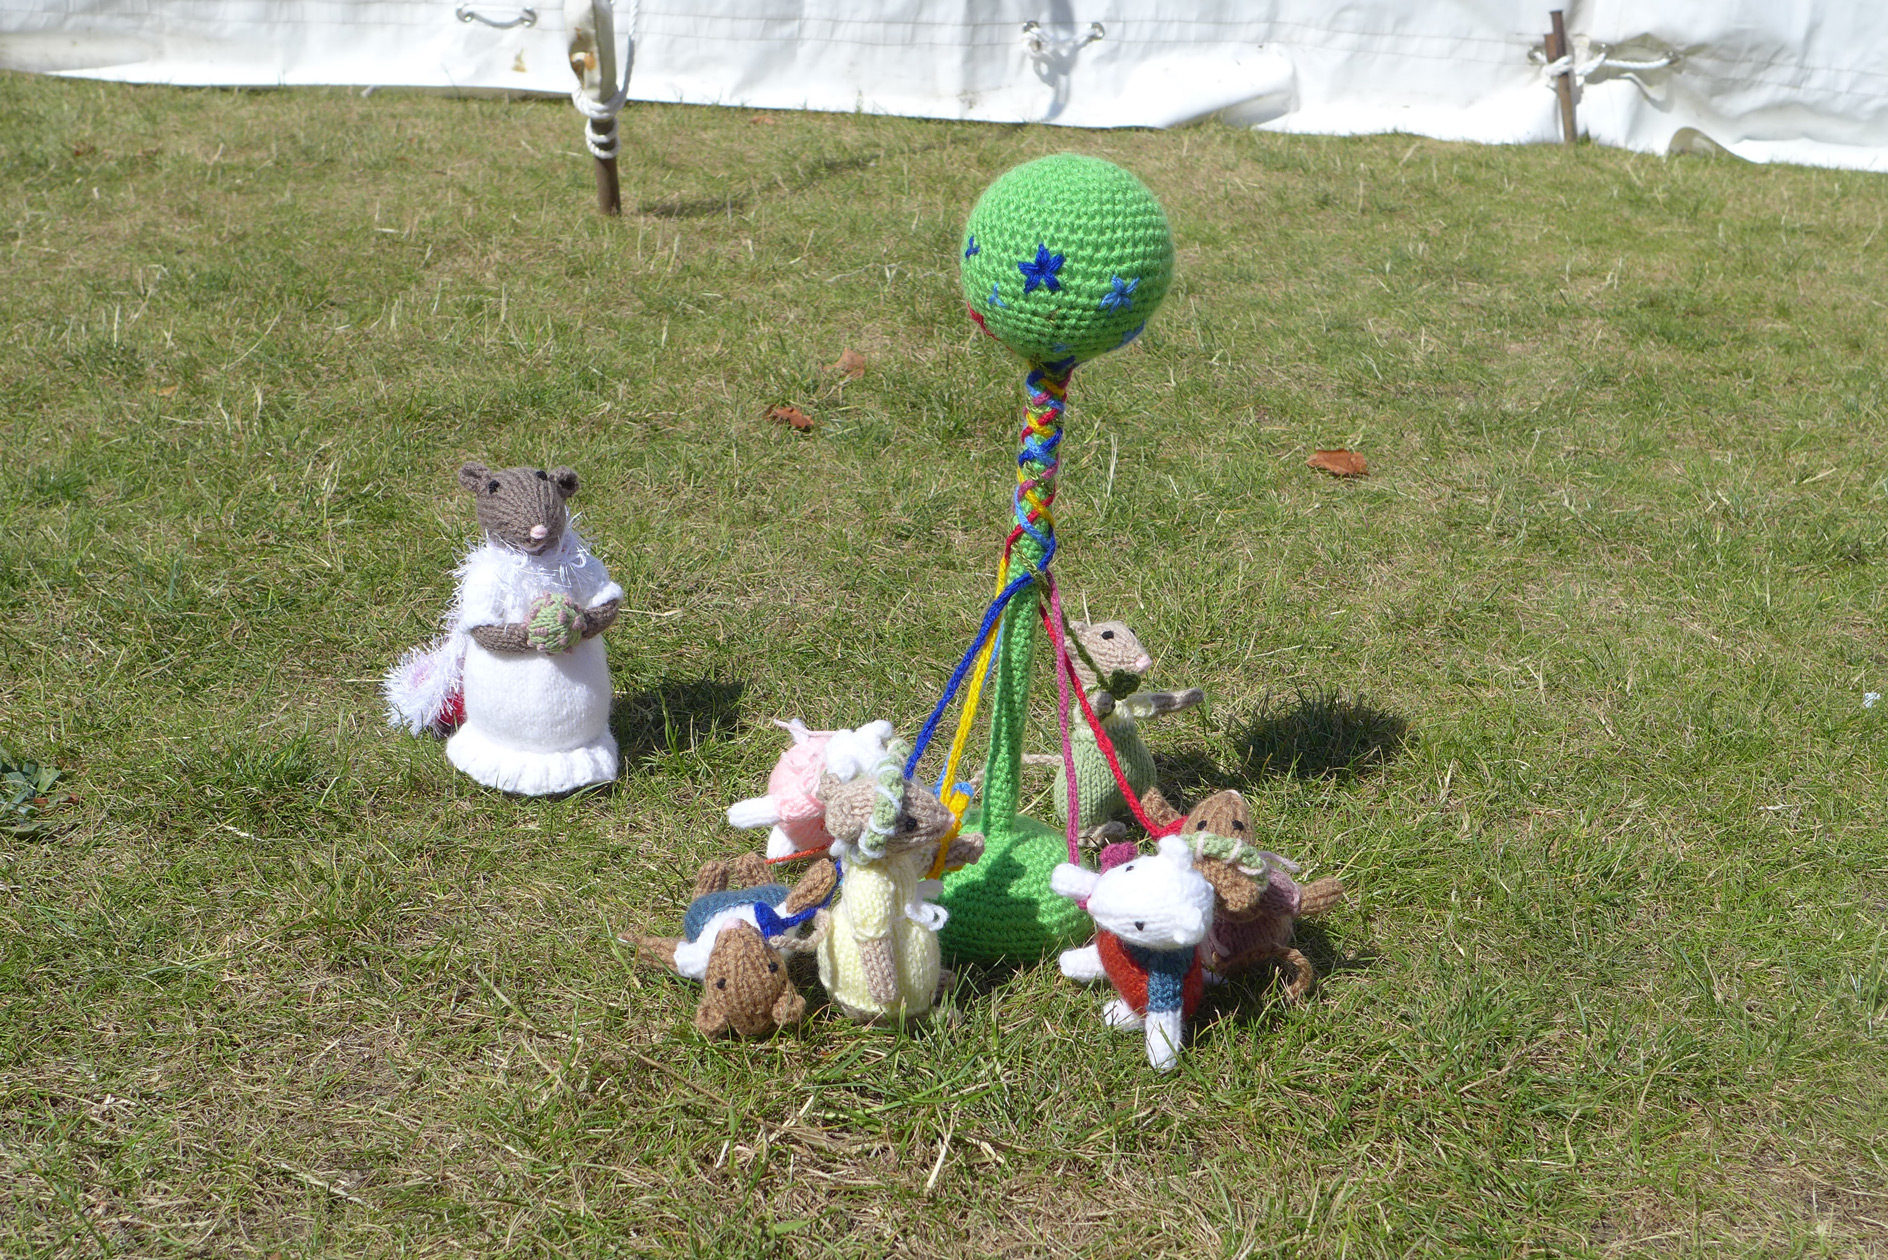 A troupe of knitted mice dancing round a maypole